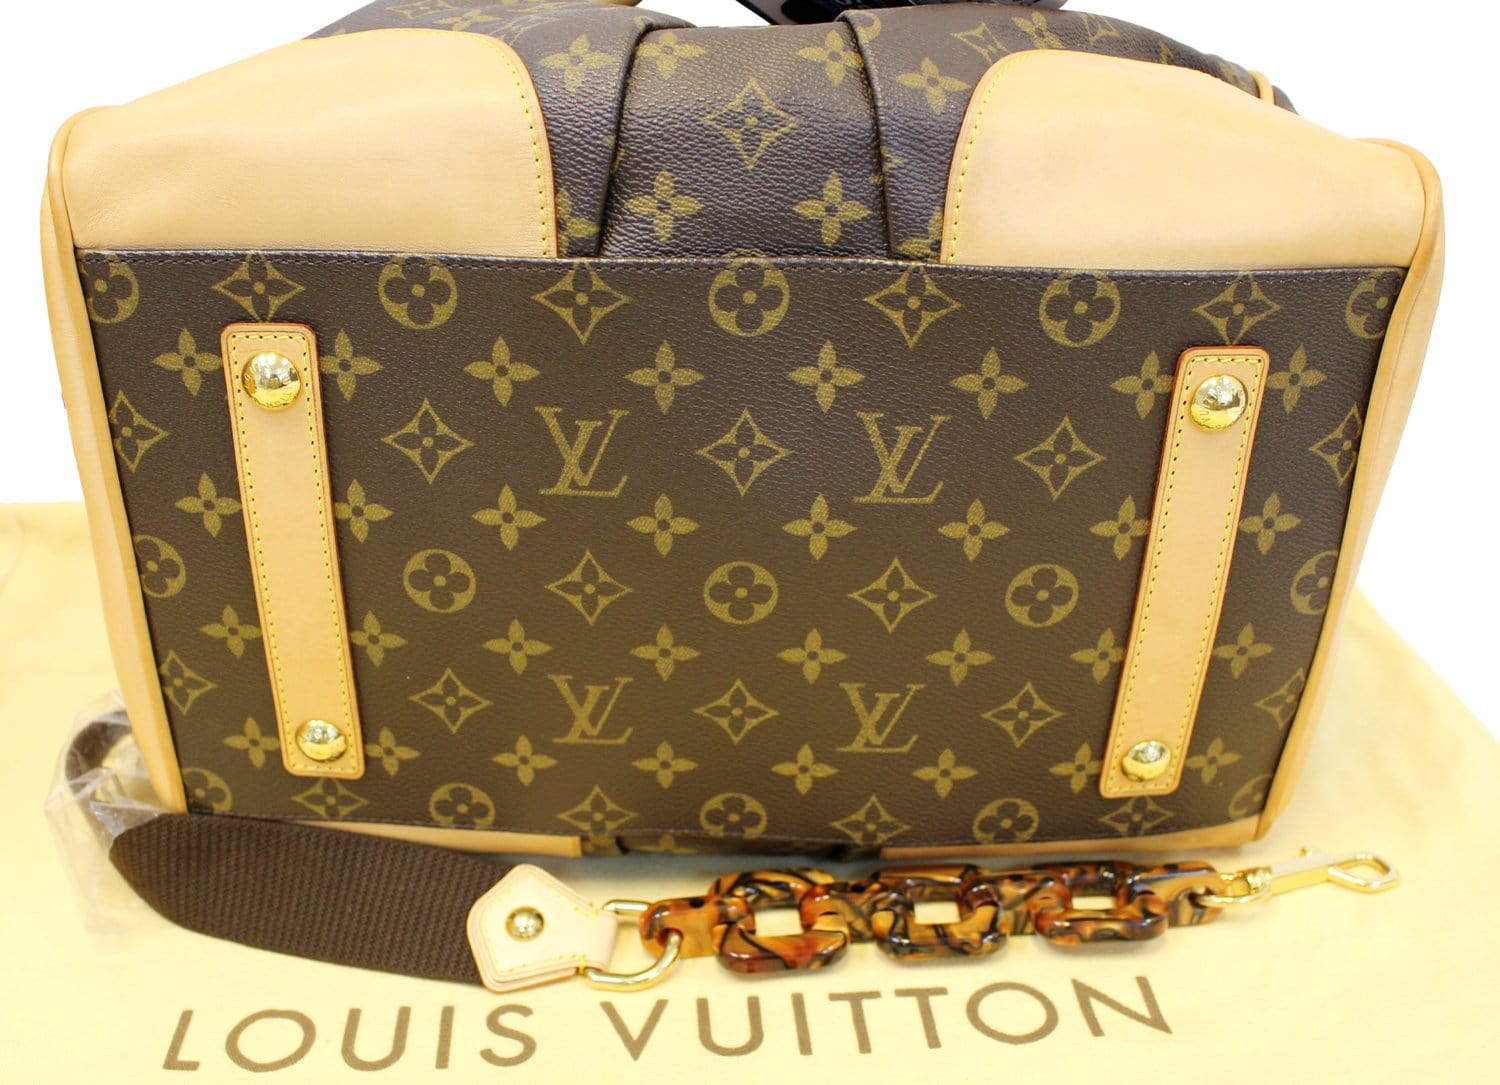 Siopaella Ltd. - We LOVE limited edition Louis Vuitton😍😍 Check out this Louis  Vuitton X Stephen Sprouse Limited Edition Monogram Canvas Floral Print “ Neverfull” MM Tote online or in store, open 10-6pm